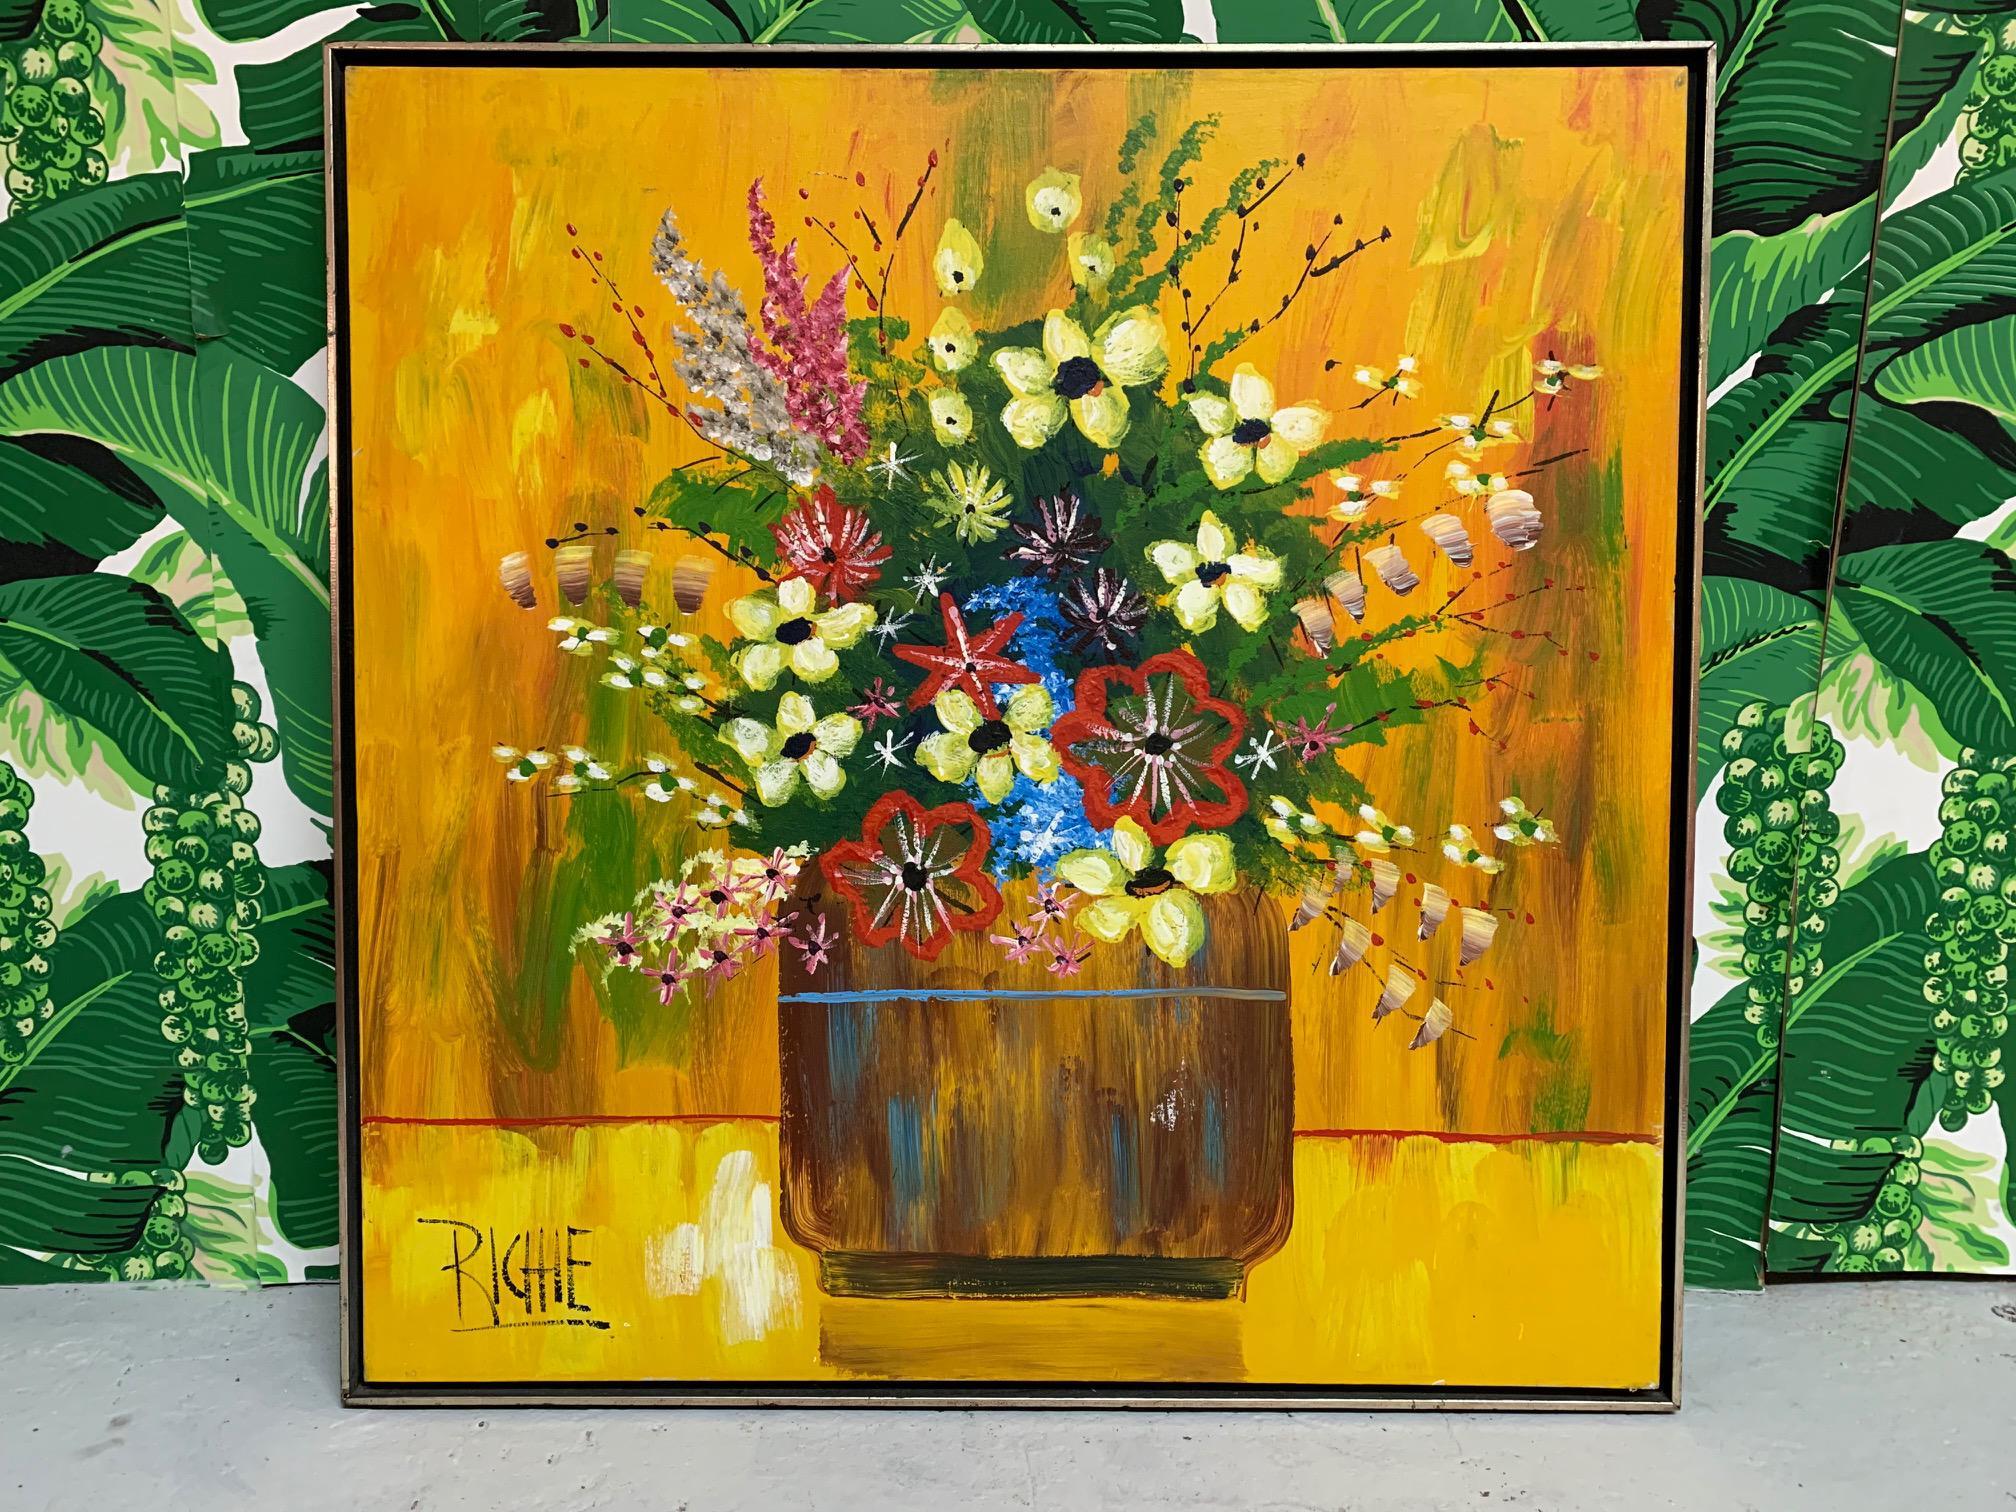 Large framed acrylic on canvas in a floral motif by artist Richie. Good condition with imperfections consistent with age. May exhibit scuffs, marks, or wear, see photos for details. 
 
 